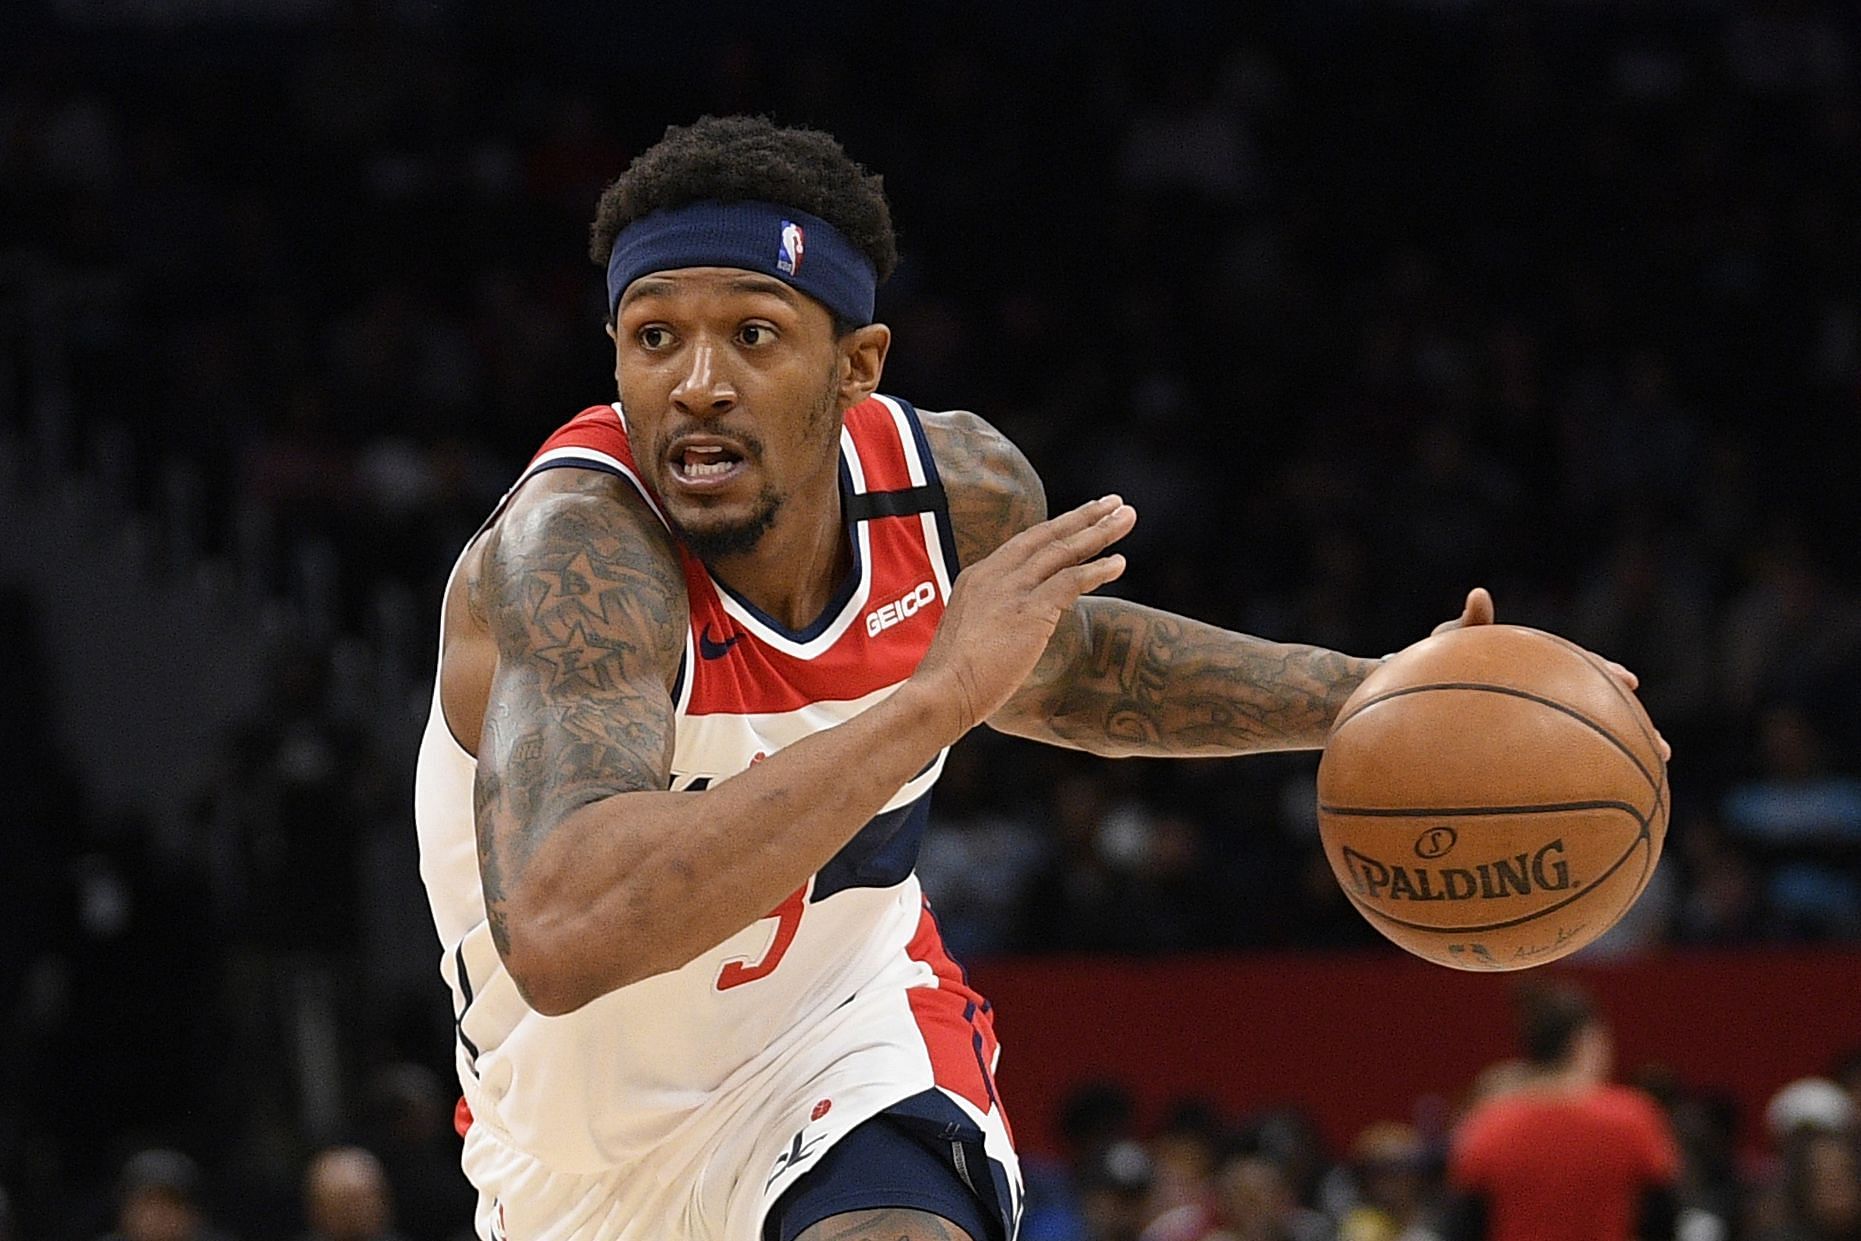 Can Bradley Beal lead the Washington Wizards over Luka Doncic and the Mavericks?